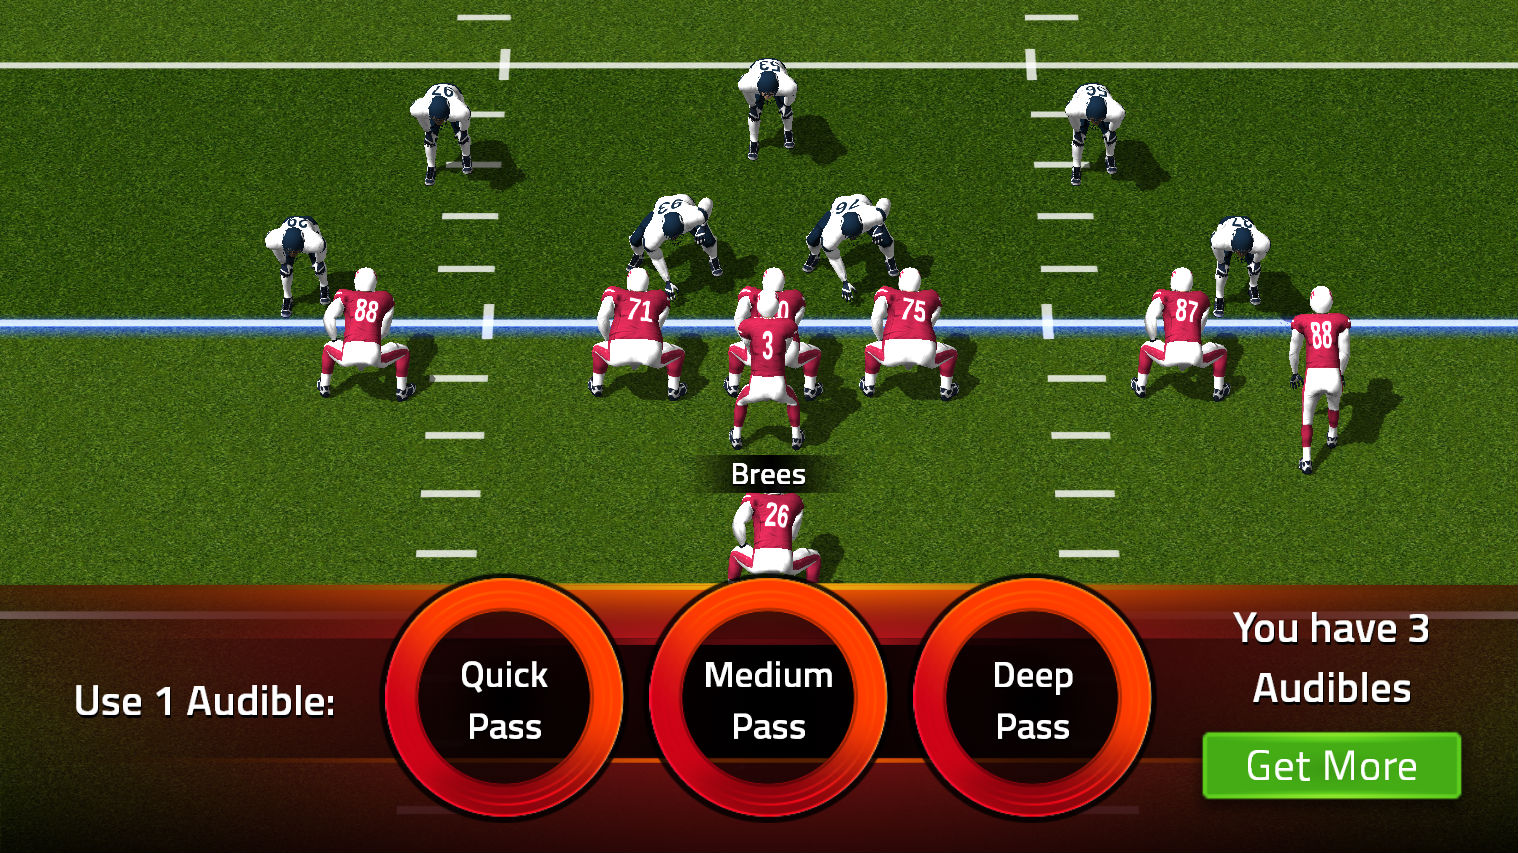 Tap Sports Football Review: One-Hand Touch